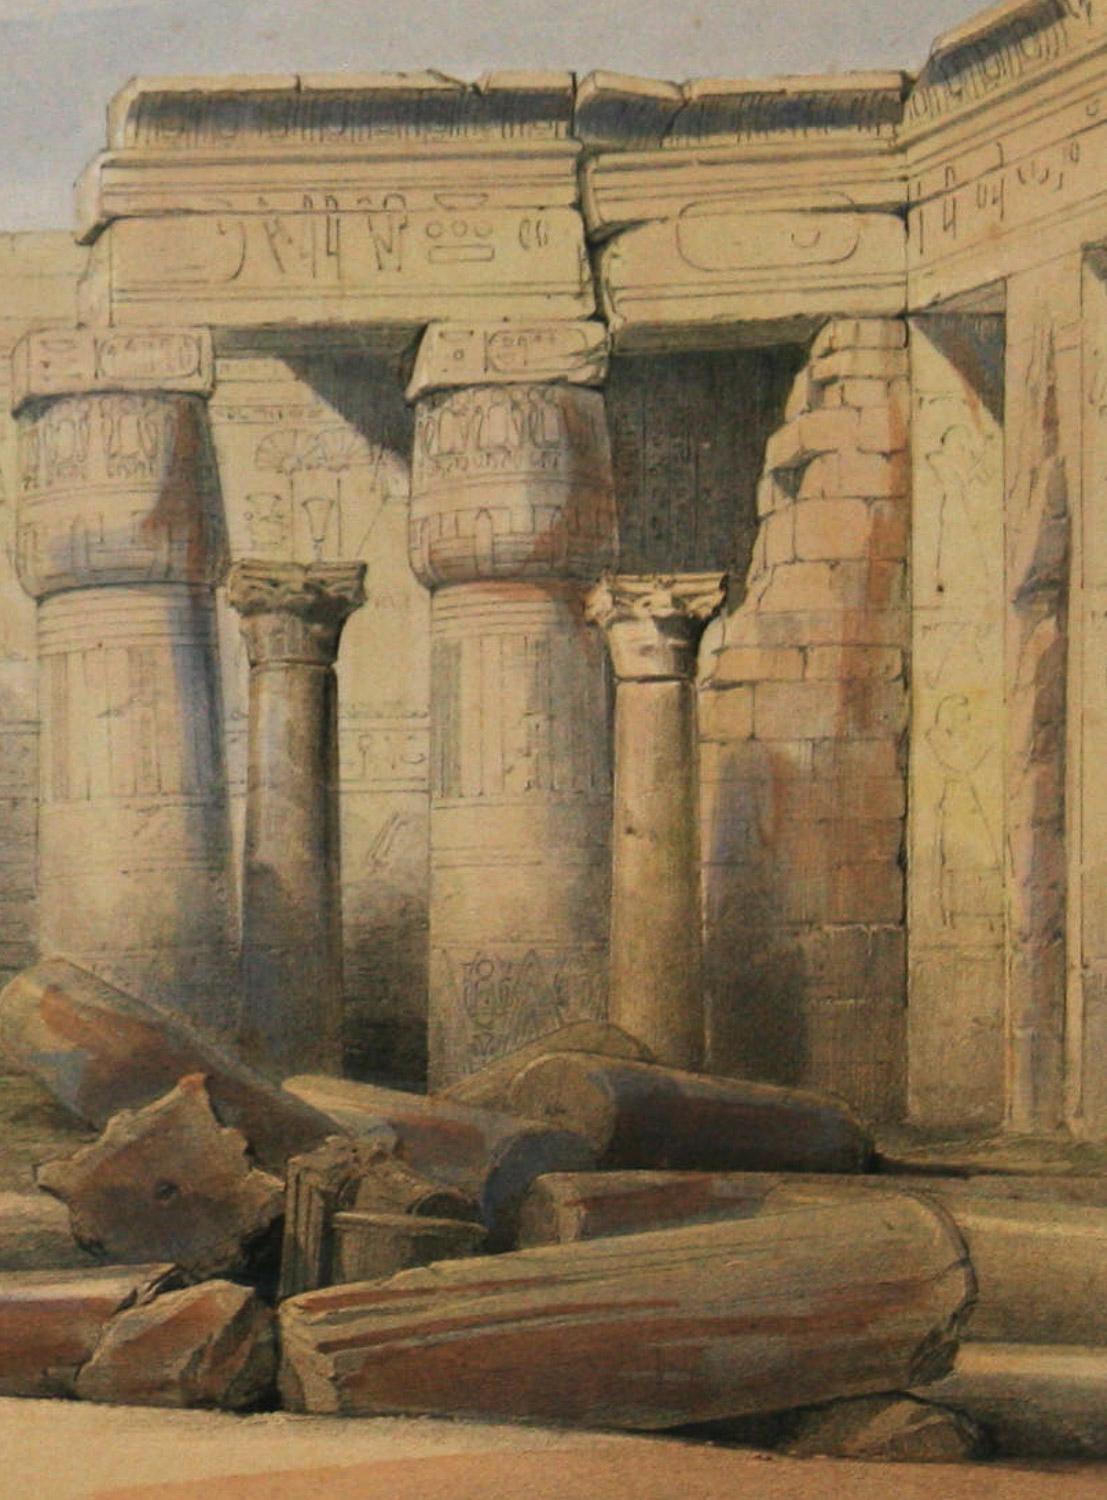 Abou, Thebes, Granat  Lithographie „ Views of the Holy Land“ von David Roberts im Angebot 2